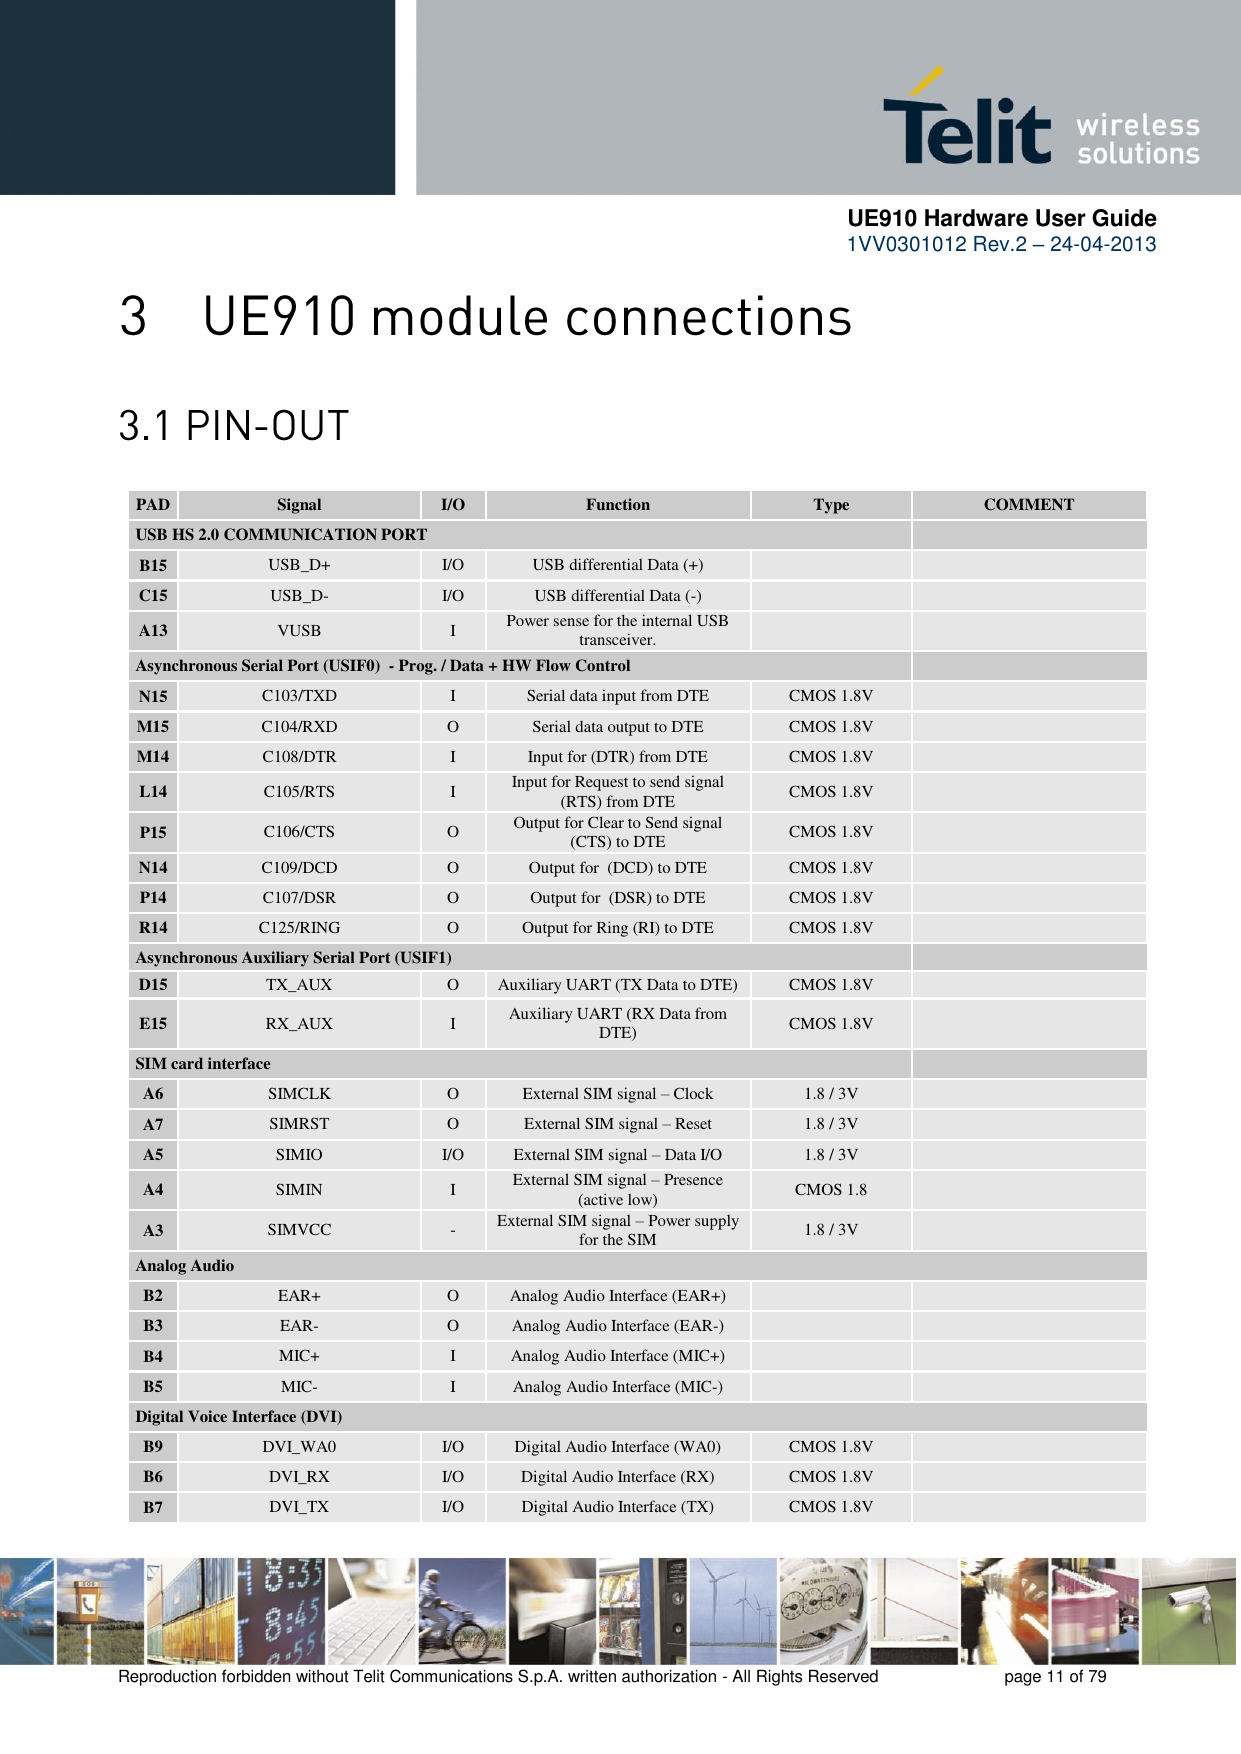      UE910 Hardware User Guide  1VV0301012 Rev.2 – 24-04-2013    Reproduction forbidden without Telit Communications S.p.A. written authorization - All Rights Reserved    page 11 of 79    PAD Signal I/O Function Type COMMENT USB HS 2.0 COMMUNICATION PORT    B15 USB_D+ I/O USB differential Data (+)   C15 USB_D- I/O USB differential Data (-)   A13 VUSB I Power sense for the internal USB transceiver.   Asynchronous Serial Port (USIF0)  - Prog. / Data + HW Flow Control   N15 C103/TXD I Serial data input from DTE CMOS 1.8V  M15 C104/RXD O Serial data output to DTE CMOS 1.8V  M14 C108/DTR I Input for (DTR) from DTE CMOS 1.8V  L14 C105/RTS I Input for Request to send signal (RTS) from DTE CMOS 1.8V  P15 C106/CTS O Output for Clear to Send signal (CTS) to DTE CMOS 1.8V  N14 C109/DCD O Output for  (DCD) to DTE CMOS 1.8V  P14 C107/DSR O Output for  (DSR) to DTE CMOS 1.8V  R14 C125/RING O Output for Ring (RI) to DTE CMOS 1.8V  Asynchronous Auxiliary Serial Port (USIF1)    D15 TX_AUX O Auxiliary UART (TX Data to DTE) CMOS 1.8V  E15 RX_AUX I Auxiliary UART (RX Data from DTE) CMOS 1.8V  SIM card interface     A6 SIMCLK O External SIM signal – Clock 1.8 / 3V  A7 SIMRST O External SIM signal – Reset 1.8 / 3V  A5 SIMIO I/O External SIM signal – Data I/O 1.8 / 3V  A4 SIMIN I External SIM signal – Presence (active low) CMOS 1.8  A3 SIMVCC - External SIM signal – Power supply for the SIM 1.8 / 3V  Analog Audio  B2 EAR+ O Analog Audio Interface (EAR+)   B3 EAR- O Analog Audio Interface (EAR-)   B4 MIC+ I Analog Audio Interface (MIC+)   B5 MIC- I Analog Audio Interface (MIC-)   Digital Voice Interface (DVI)  B9 DVI_WA0 I/O Digital Audio Interface (WA0) CMOS 1.8V  B6 DVI_RX I/O Digital Audio Interface (RX) CMOS 1.8V  B7 DVI_TX I/O Digital Audio Interface (TX) CMOS 1.8V  